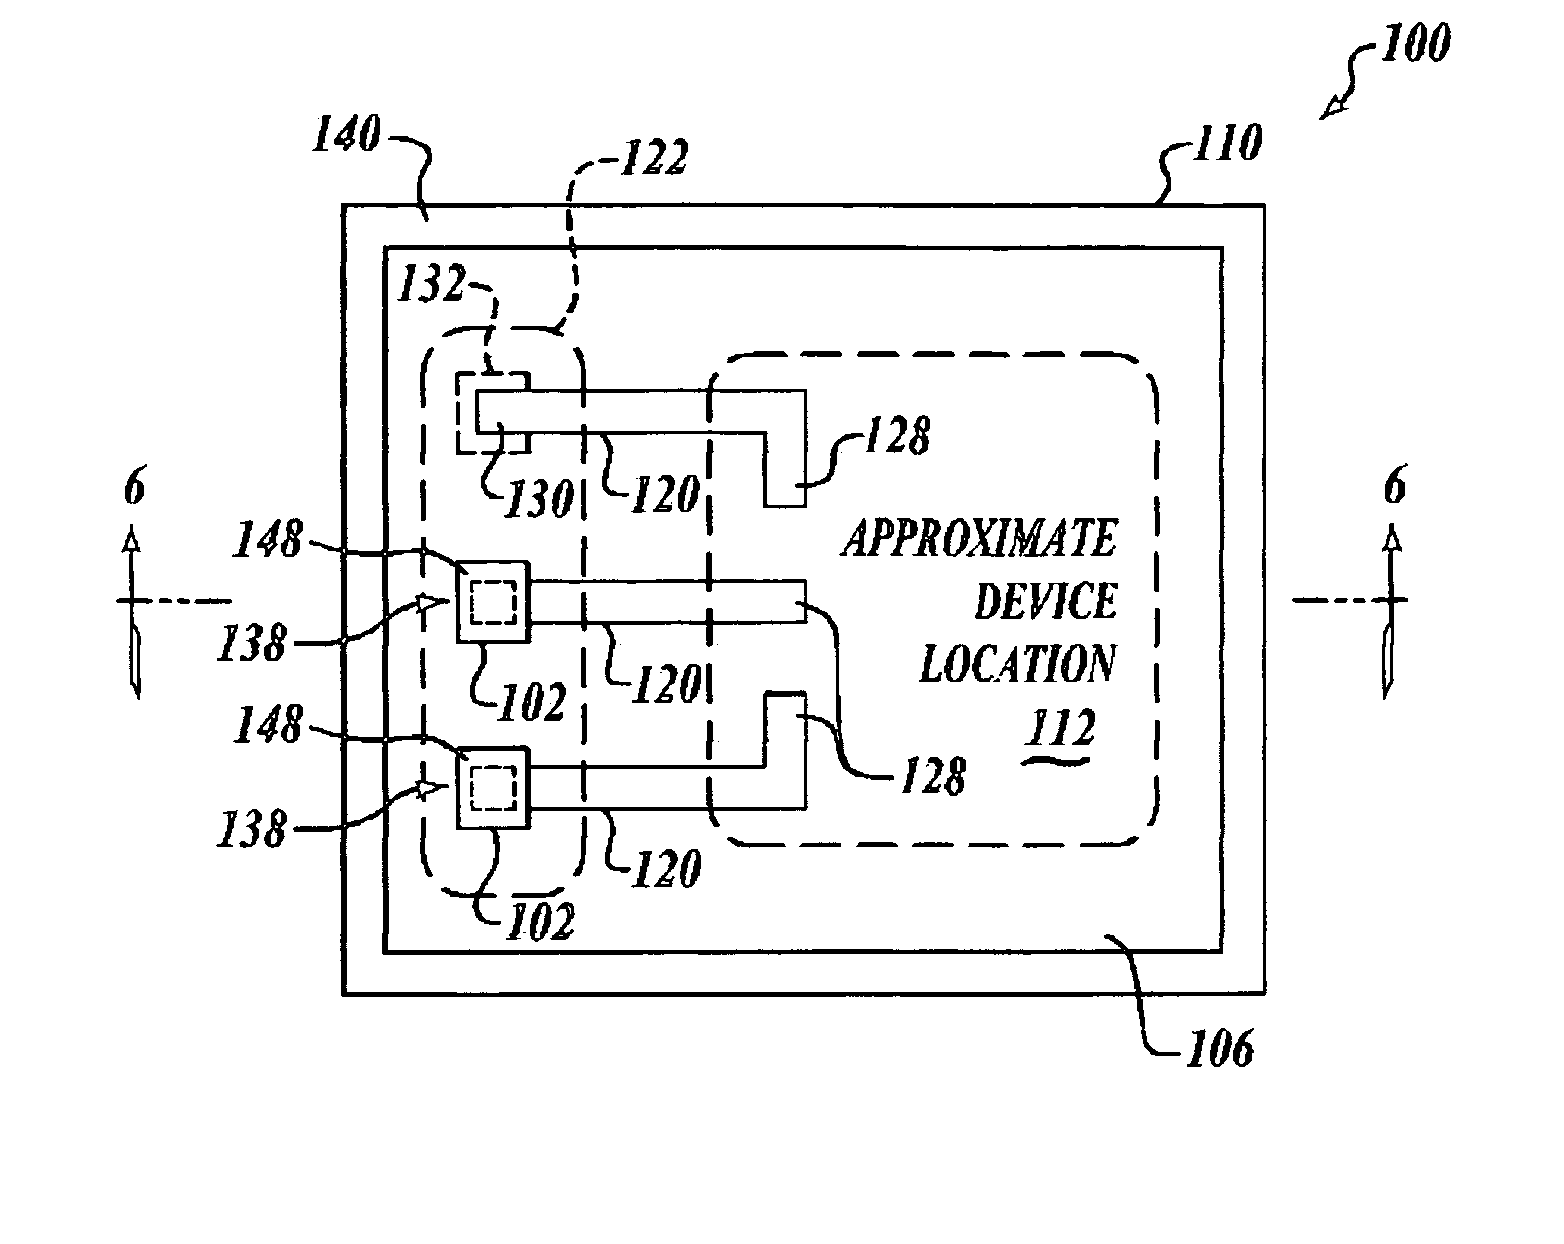 Signal routing in a hermetically sealed MEMS device